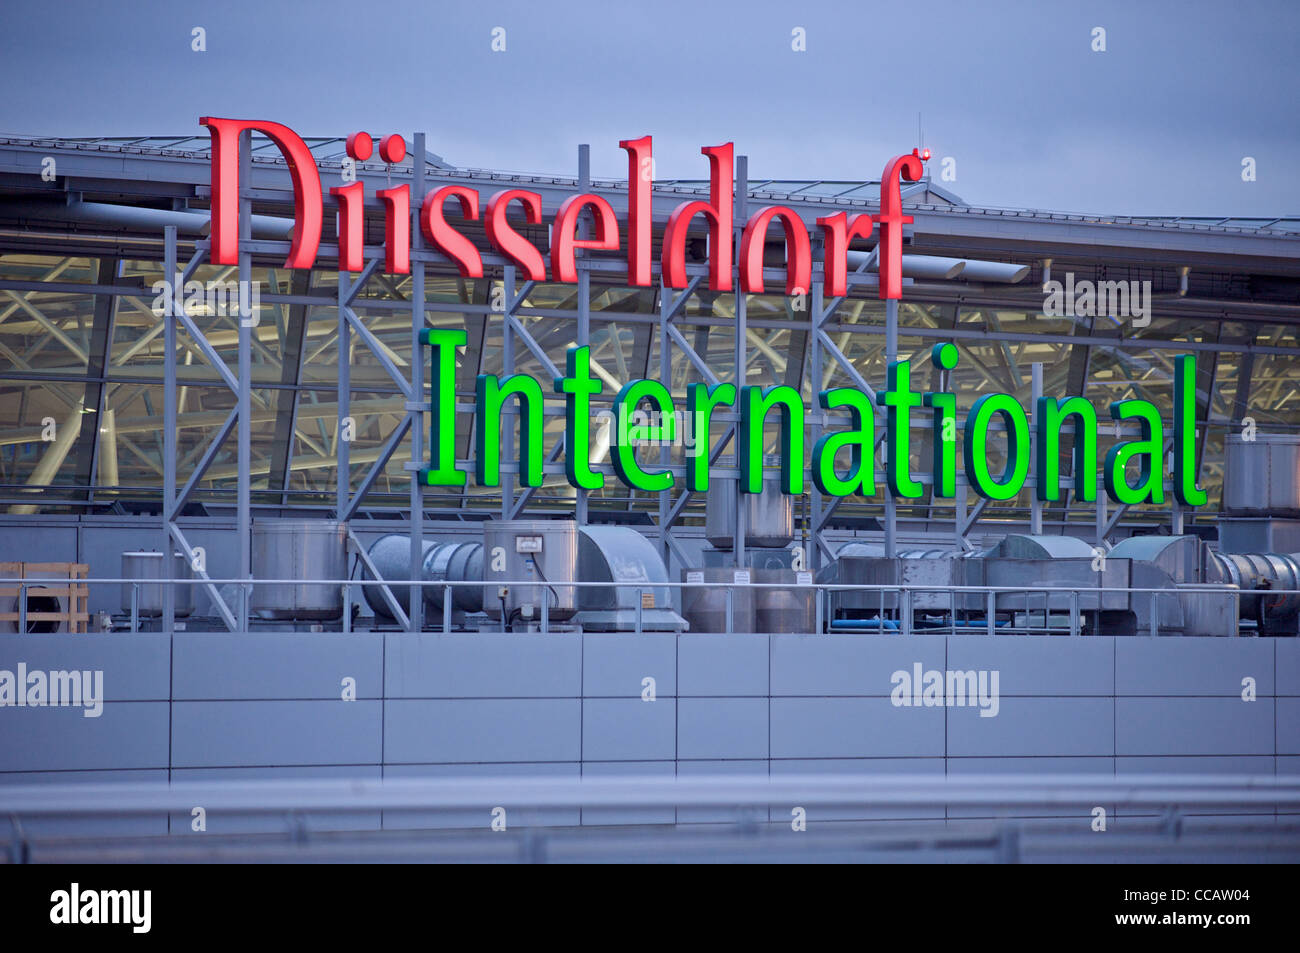 What is Dusseldorf Airport Transfer and Why Is It Important?